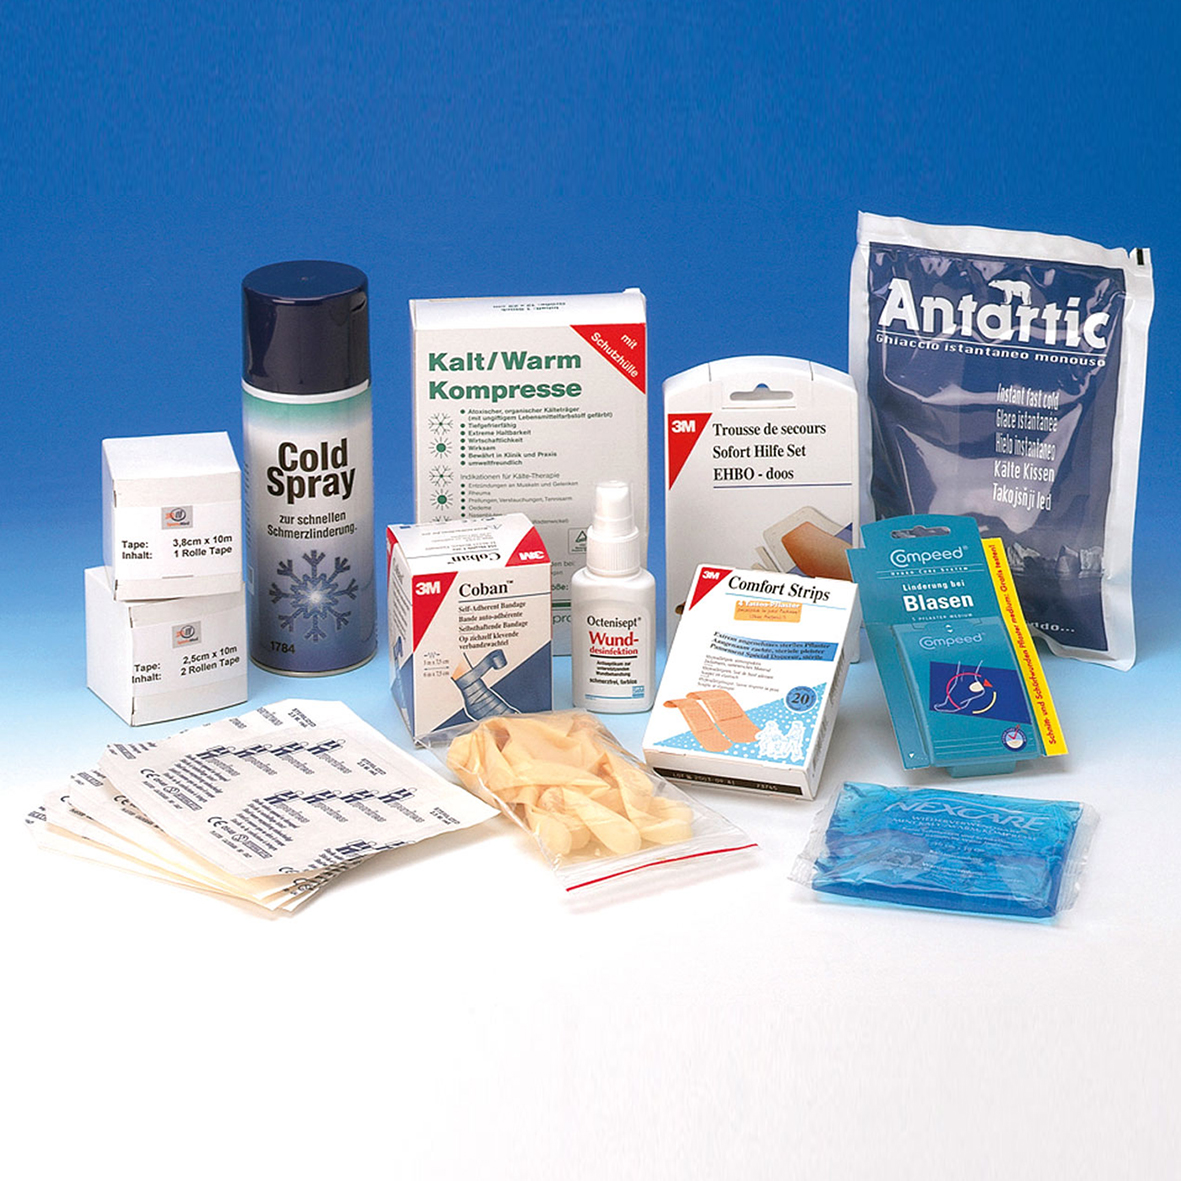 FIRST AID MATERIAL FOR FIRST AID KIT.